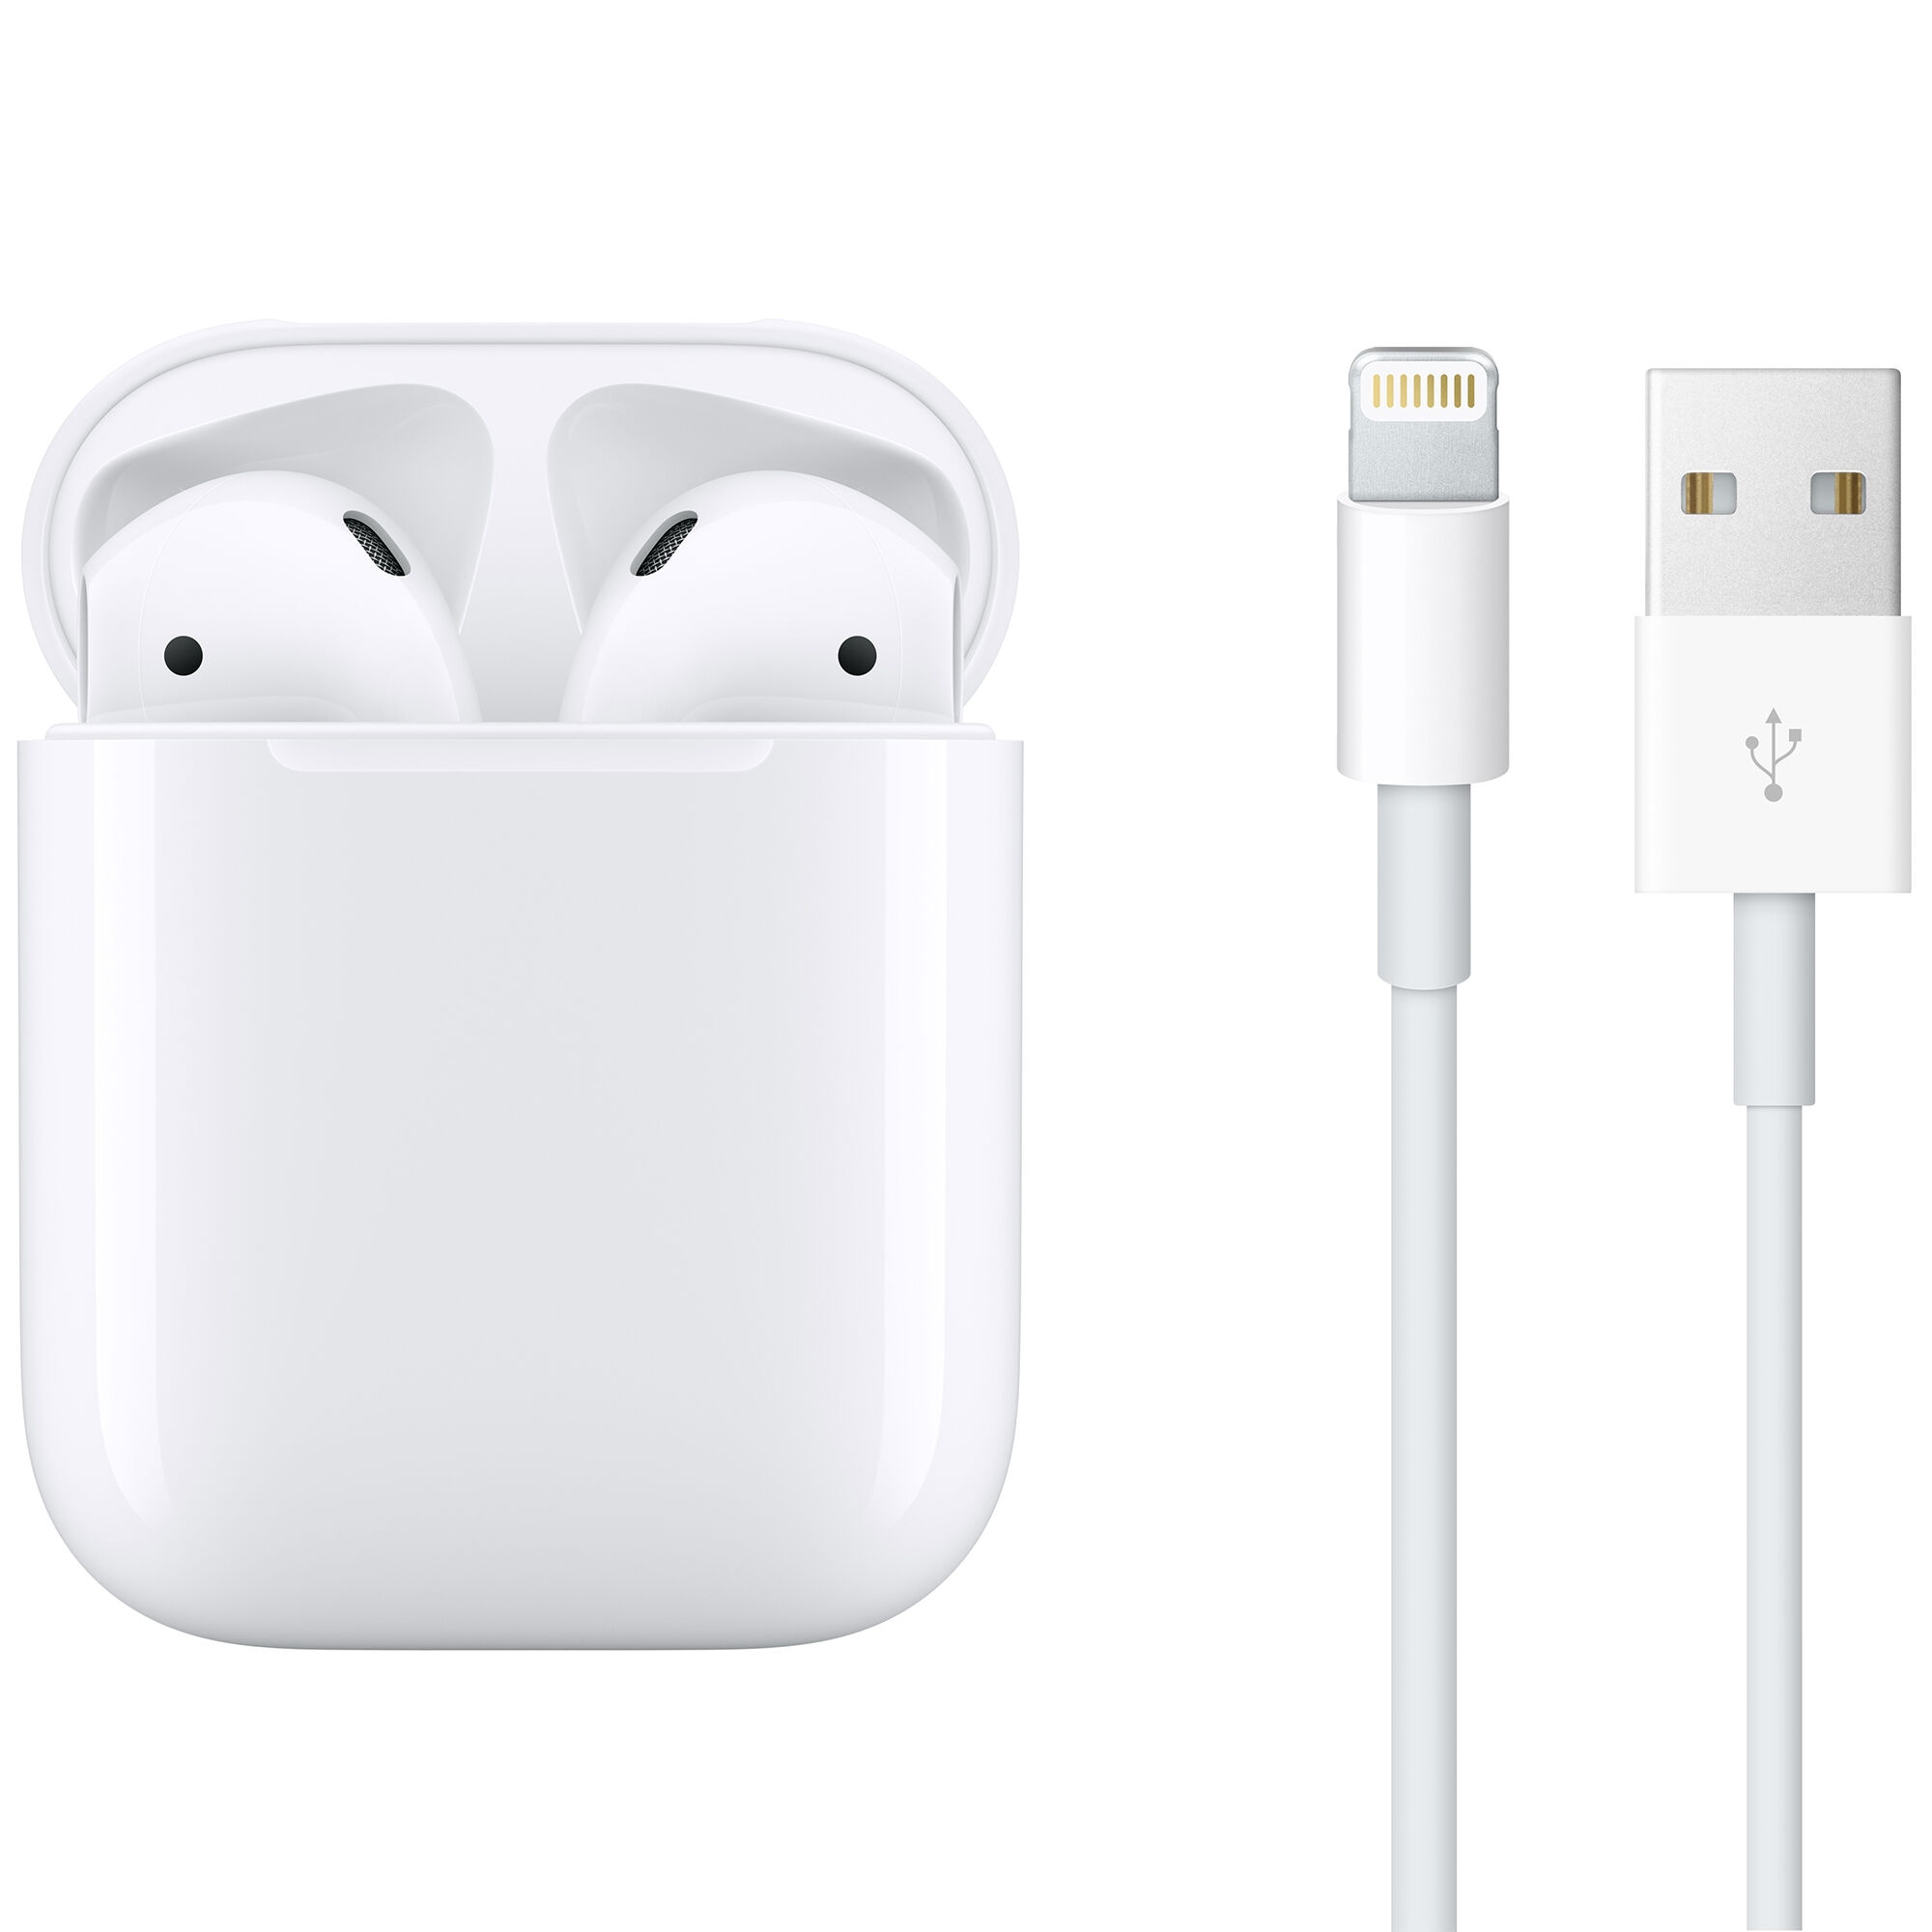 Apple AirPods In Ear Wireless Headphones with Wireless Charging